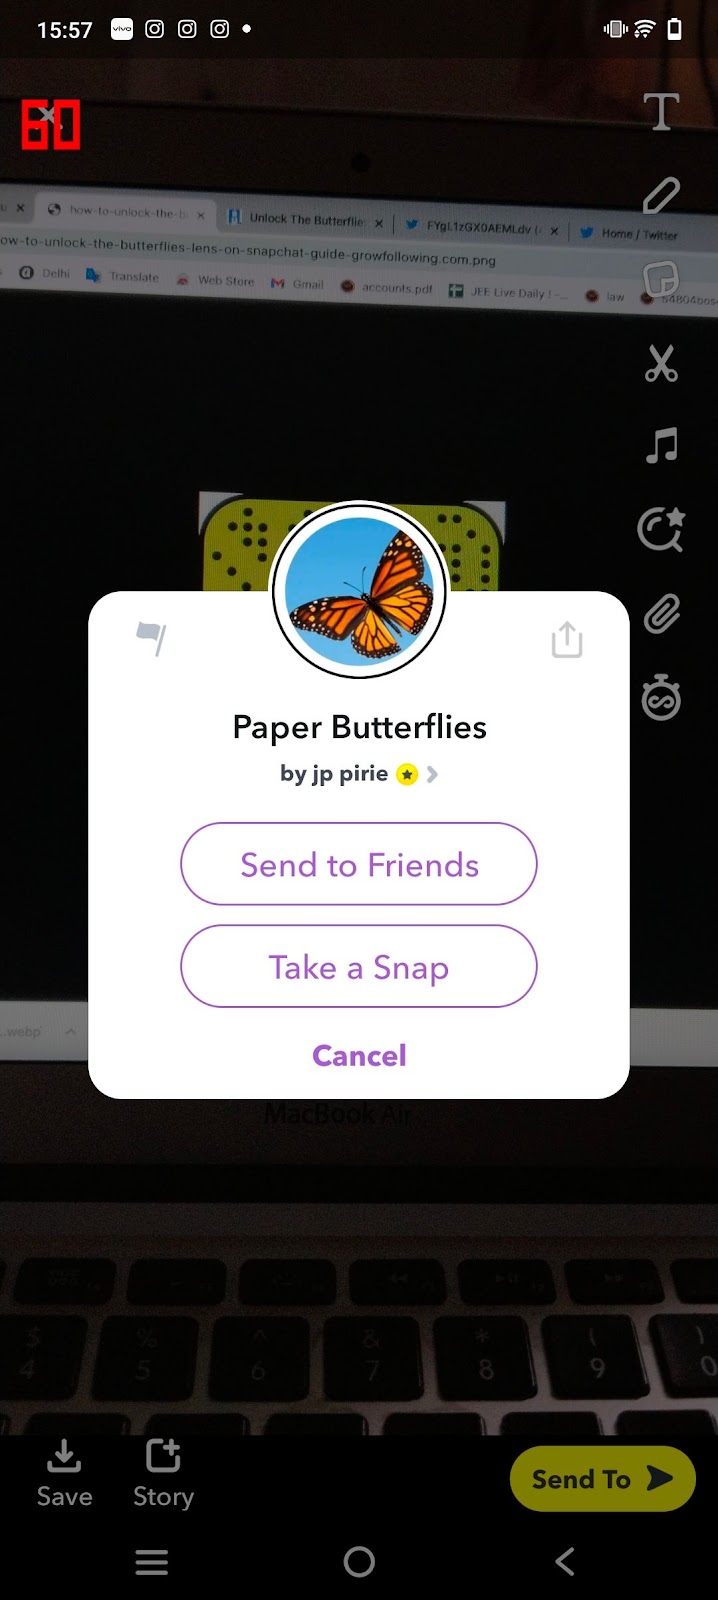 Open the Snapchat mobile app